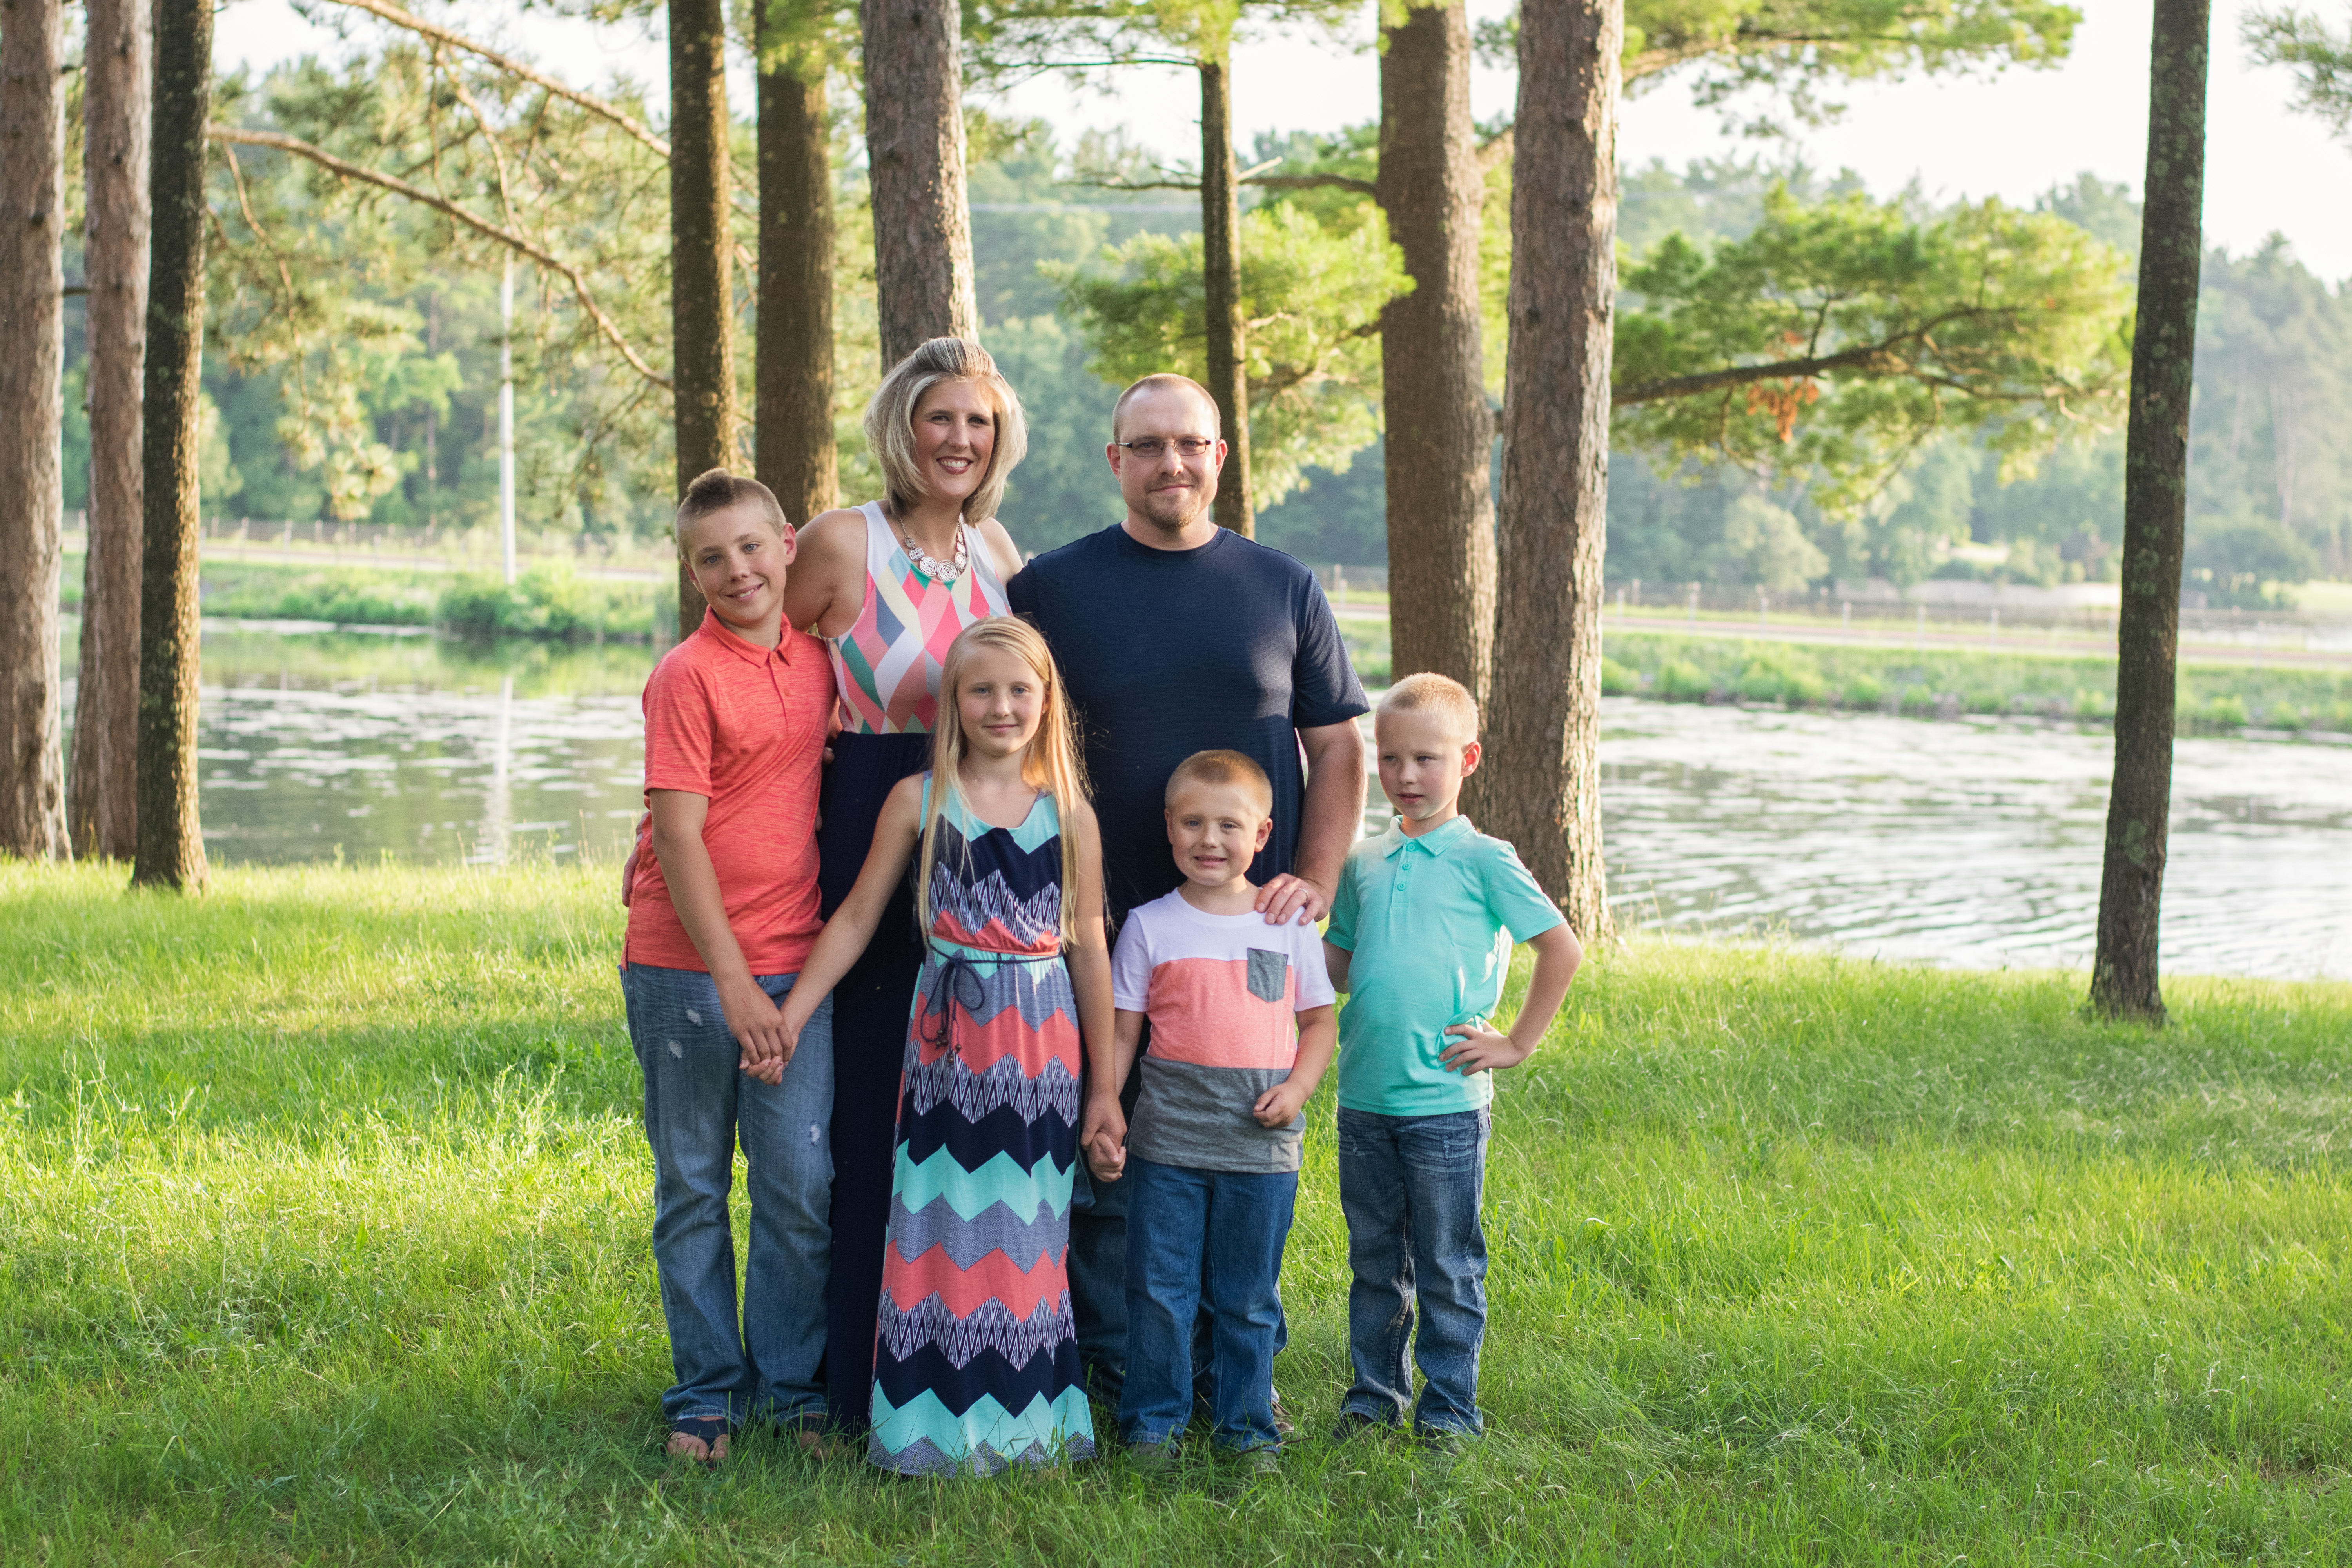 The Wrycza Family standing in front of the river with trees in the background.